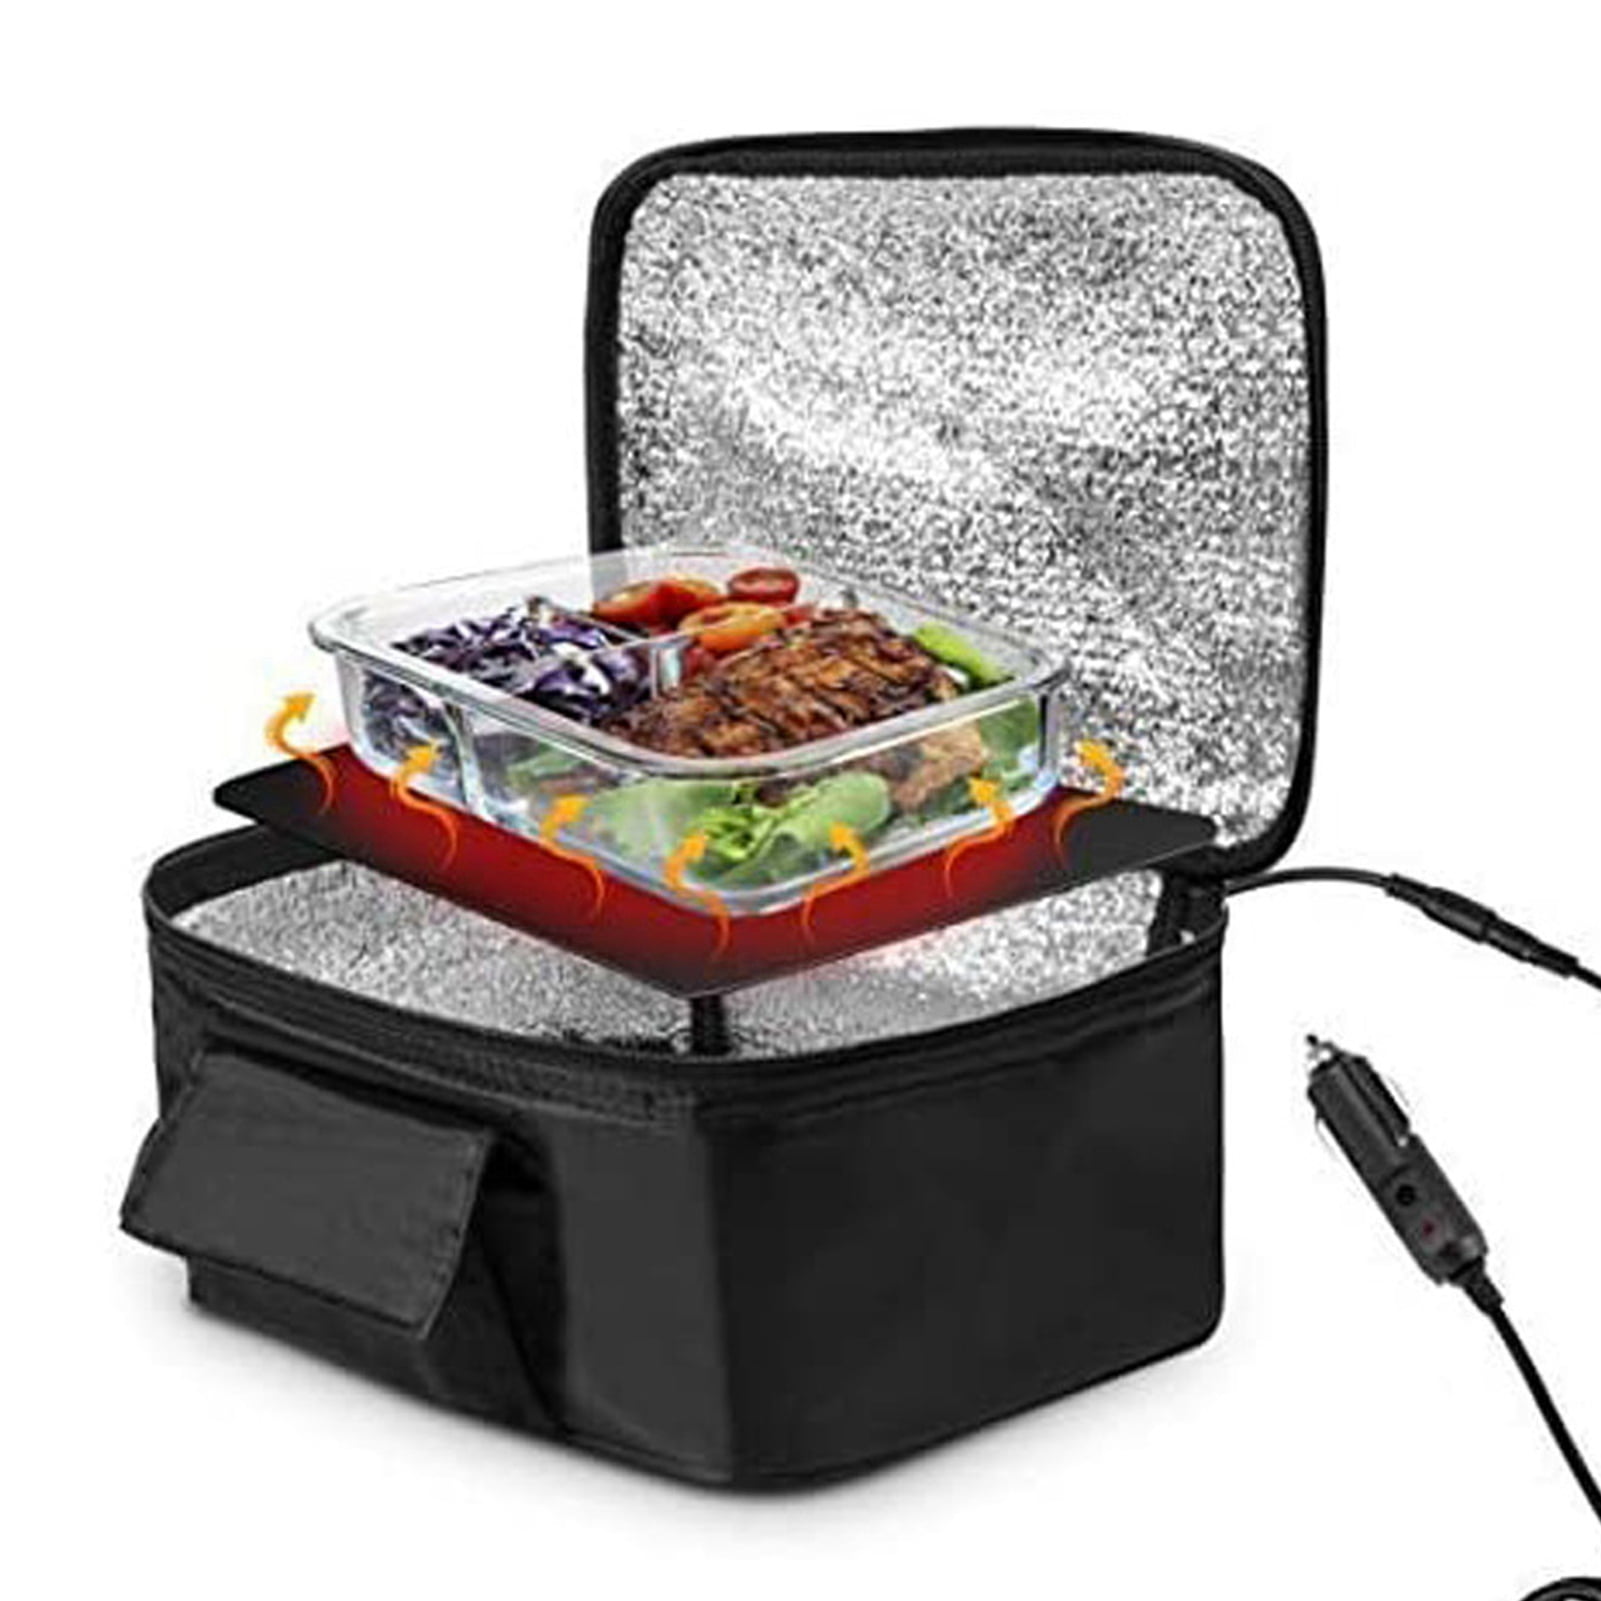 Taiping Lake Portable Oven Heated Lunch Box Personal Mini Oven Food Warmer Lunch Box for Car Office Home Kitchen Travel Outdoor Camping Picnic